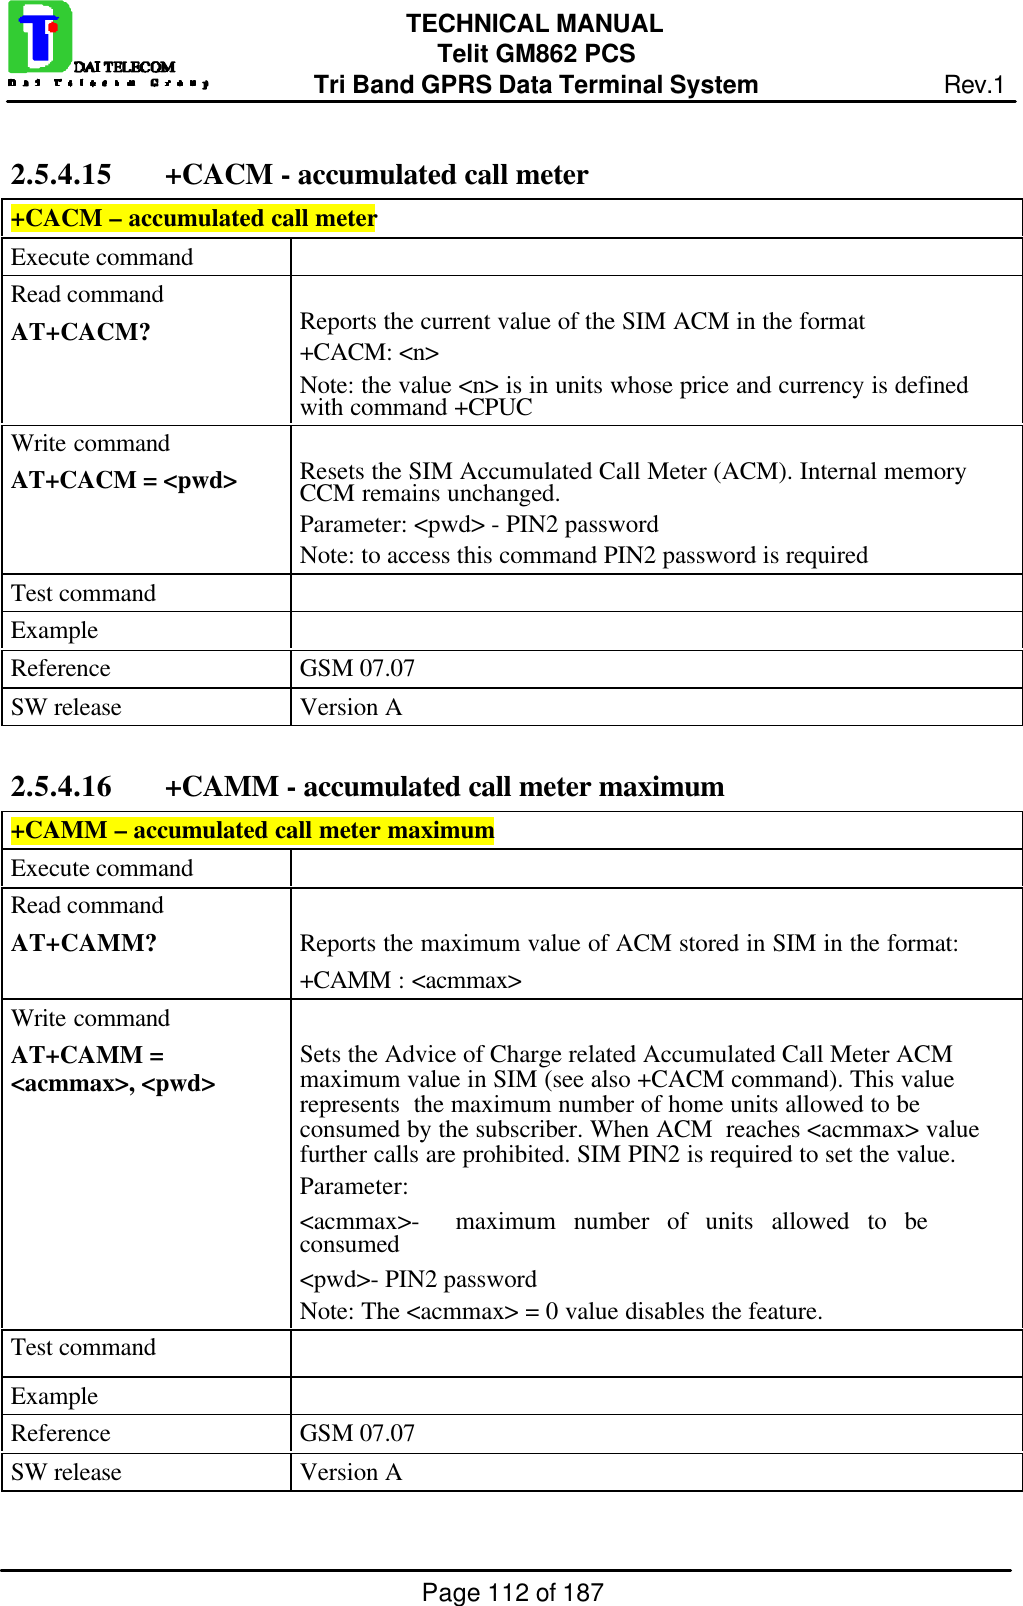 Page 112 of 187TECHNICAL MANUALTelit GM862 PCSTri Band GPRS Data Terminal System Rev.12.5.4.15  +CACM - accumulated call meter+CACM – accumulated call meterExecute commandRead commandAT+CACM? Reports the current value of the SIM ACM in the format+CACM: &lt;n&gt;Note: the value &lt;n&gt; is in units whose price and currency is definedwith command +CPUCWrite commandAT+CACM = &lt;pwd&gt; Resets the SIM Accumulated Call Meter (ACM). Internal memoryCCM remains unchanged.Parameter: &lt;pwd&gt; - PIN2 passwordNote: to access this command PIN2 password is requiredTest commandExampleReference GSM 07.07SW release Version A2.5.4.16  +CAMM - accumulated call meter maximum+CAMM – accumulated call meter maximumExecute commandRead commandAT+CAMM? Reports the maximum value of ACM stored in SIM in the format:+CAMM : &lt;acmmax&gt;Write commandAT+CAMM =&lt;acmmax&gt;, &lt;pwd&gt; Sets the Advice of Charge related Accumulated Call Meter ACMmaximum value in SIM (see also +CACM command). This valuerepresents  the maximum number of home units allowed to beconsumed by the subscriber. When ACM  reaches &lt;acmmax&gt; valuefurther calls are prohibited. SIM PIN2 is required to set the value.Parameter:&lt;acmmax&gt;-  maximum number of units allowed to beconsumed&lt;pwd&gt;- PIN2 passwordNote: The &lt;acmmax&gt; = 0 value disables the feature.Test commandExampleReference GSM 07.07SW release Version A